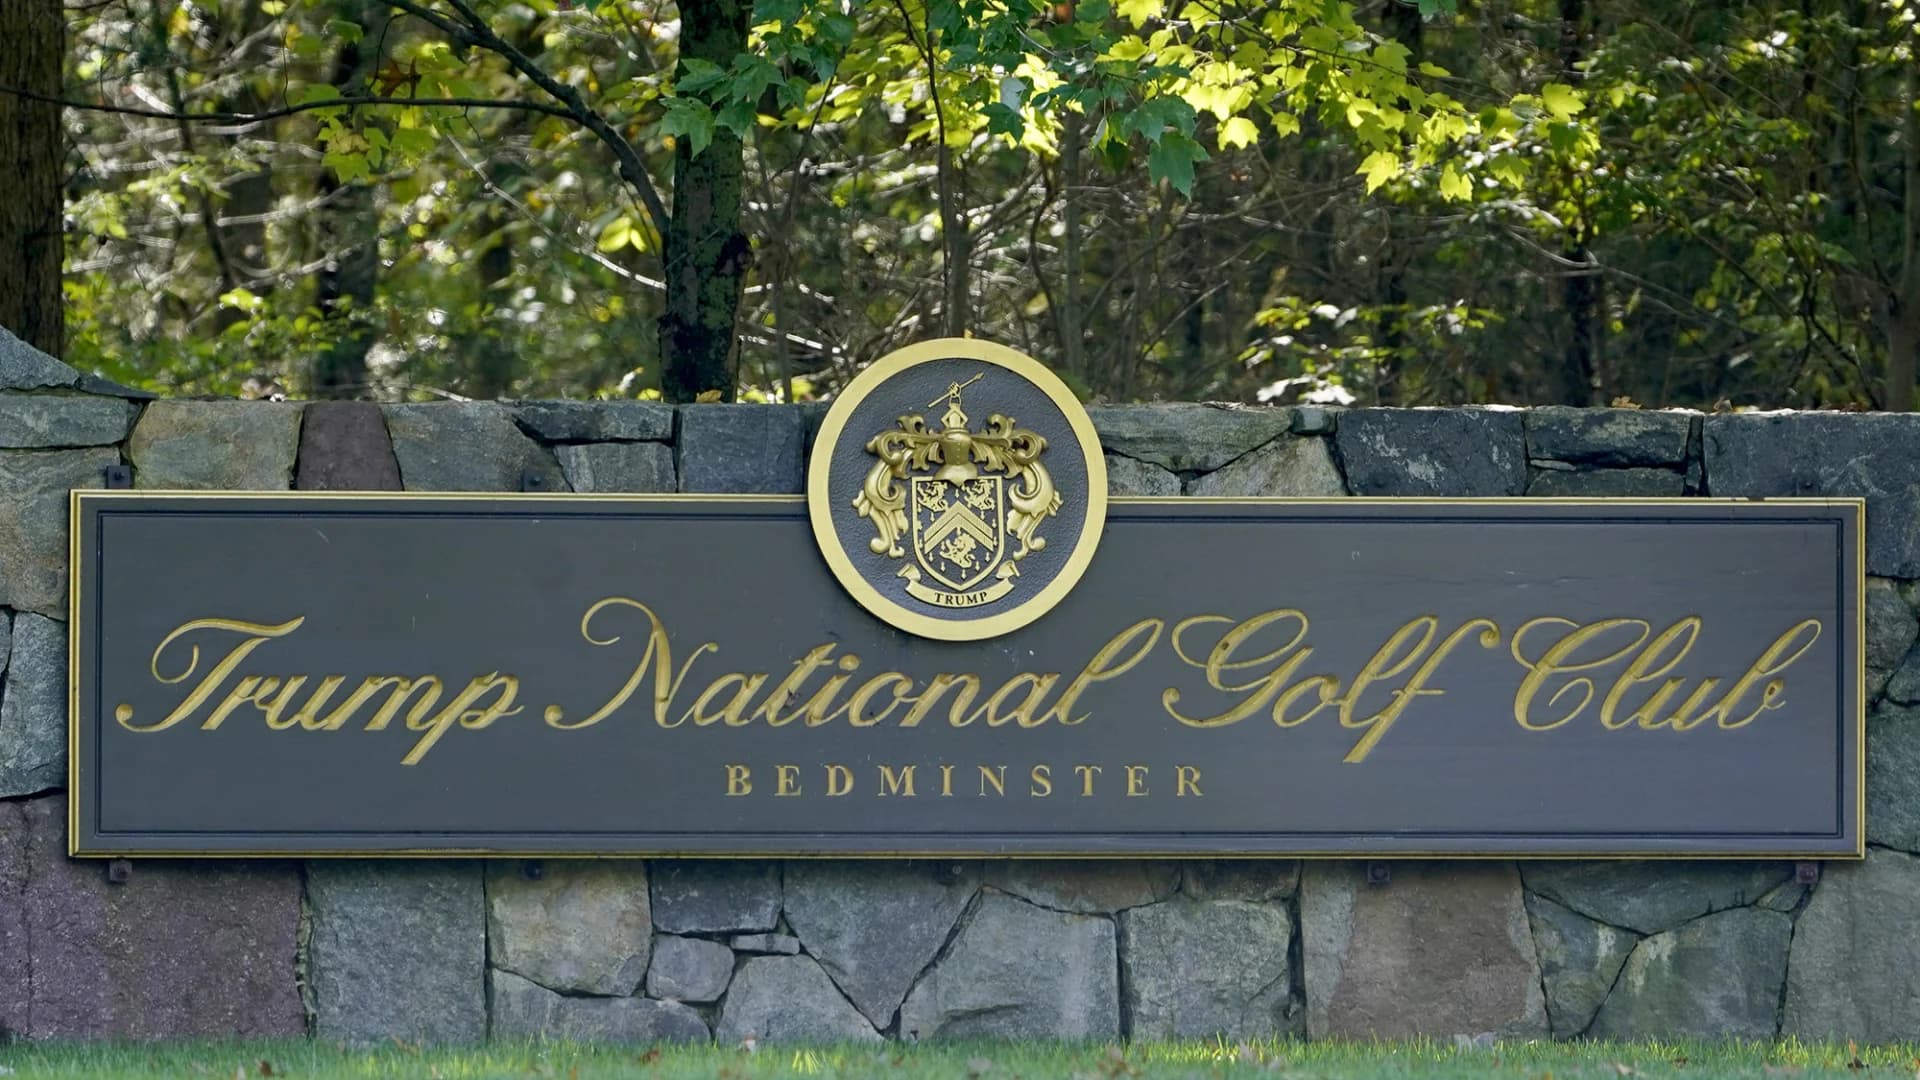 NJ Dept. of Health: White House provided names of 206 people who attended events at Trump's Bedminster club